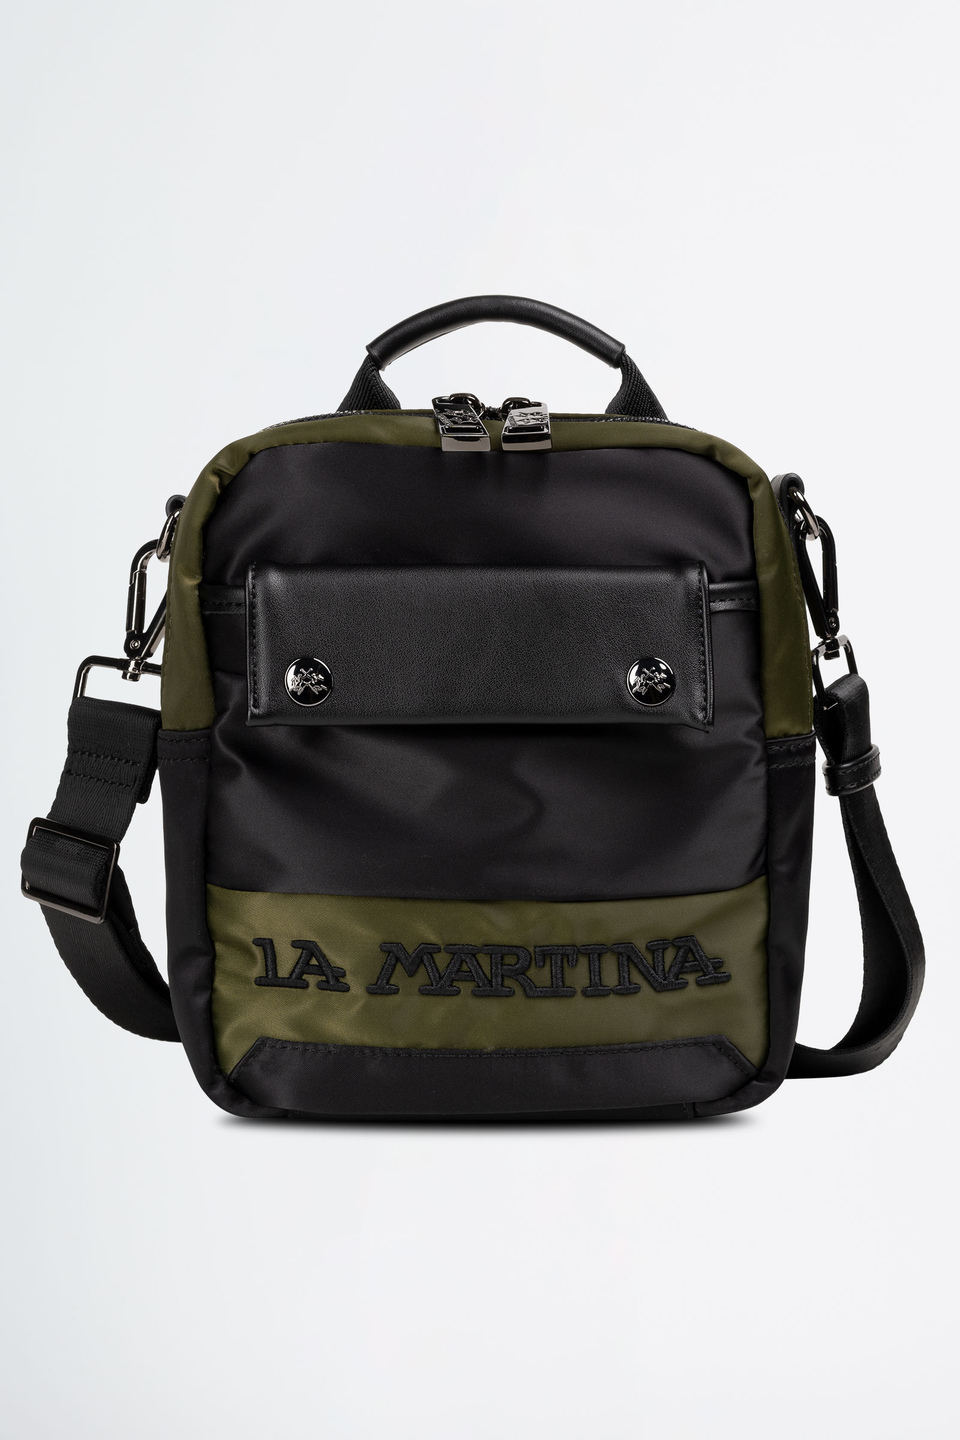 Pouch with shoulder strap in synthetic fabric | La Martina - Official Online Shop